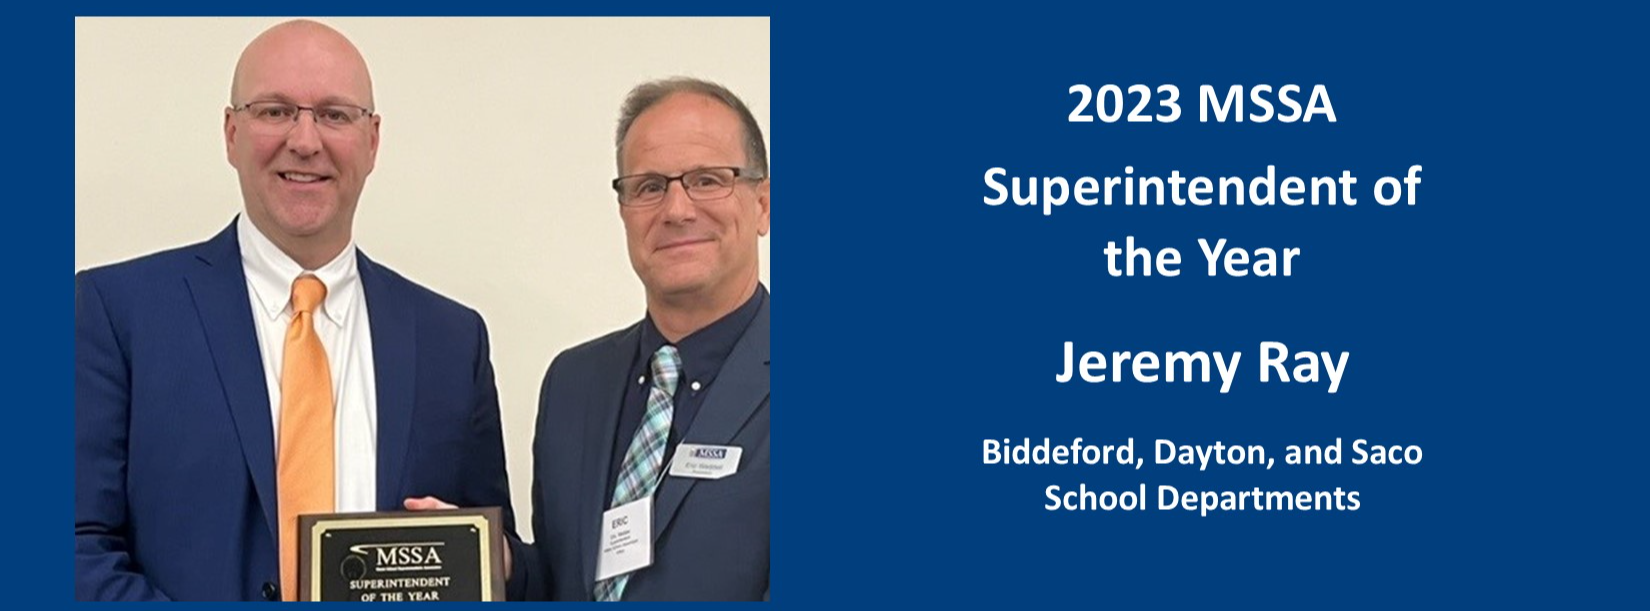 2023 Superintendent of the Year Jeremy Ray